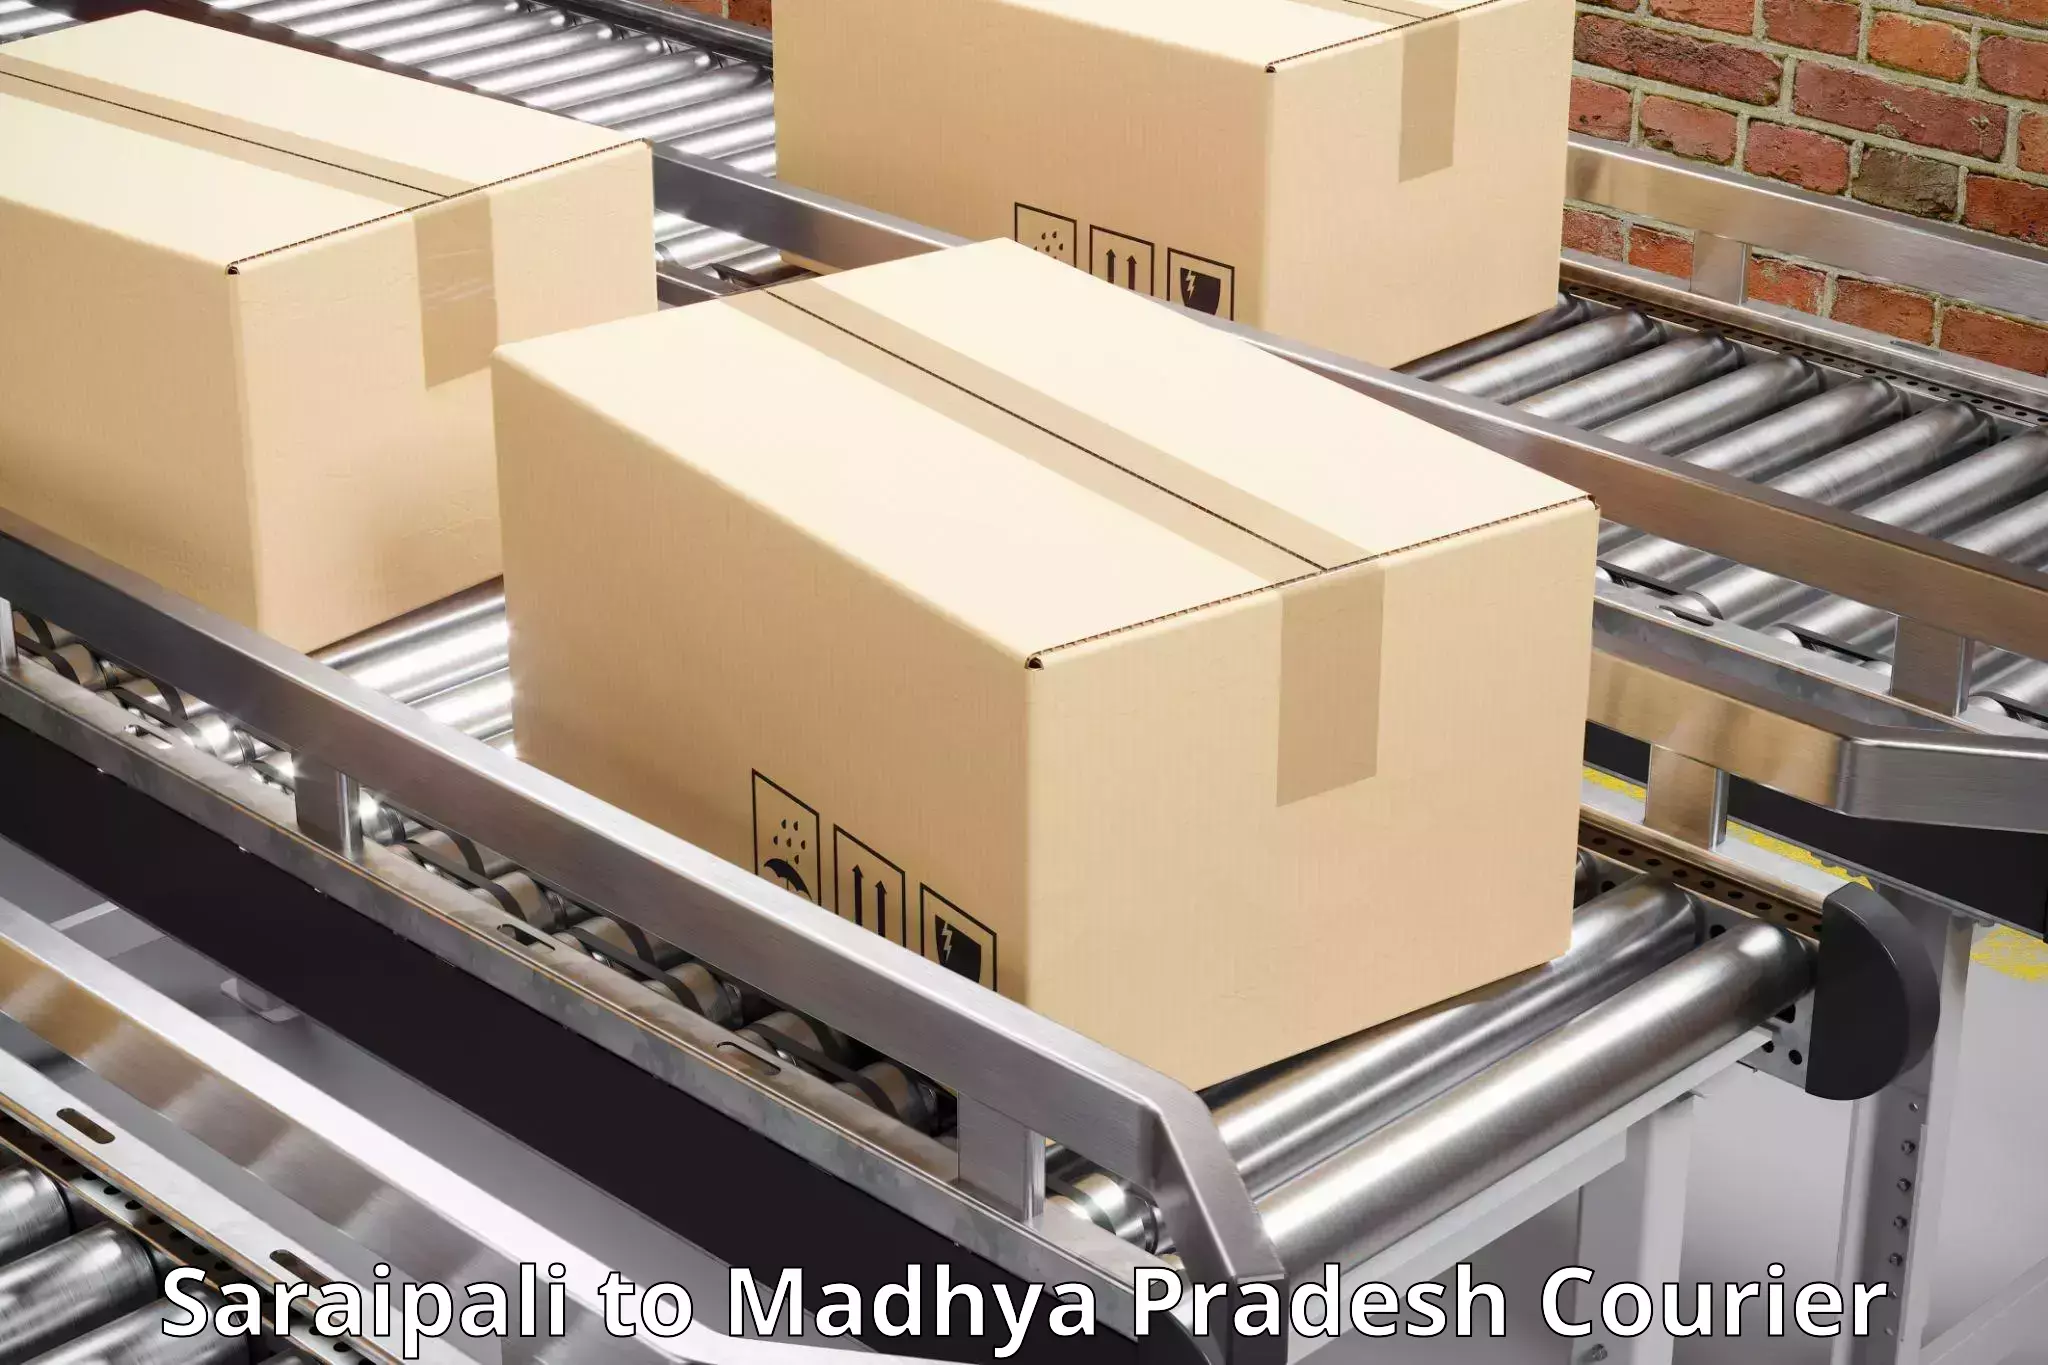 Parcel service for businesses Saraipali to Mandideep